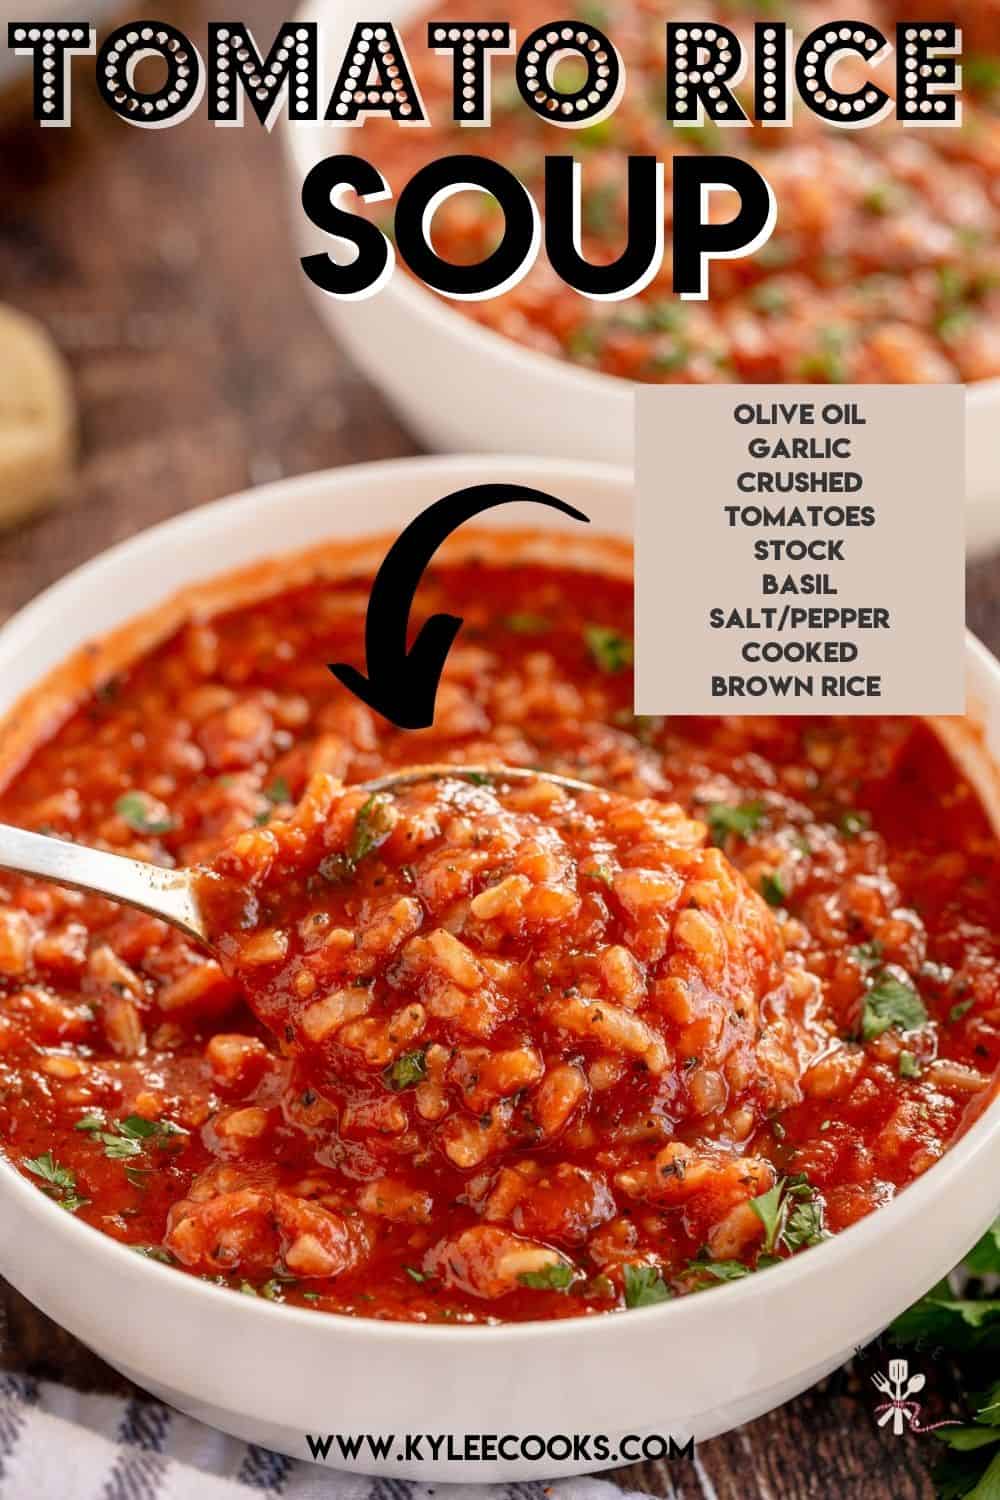 tomato rice soup with recipe title overlaid in text.